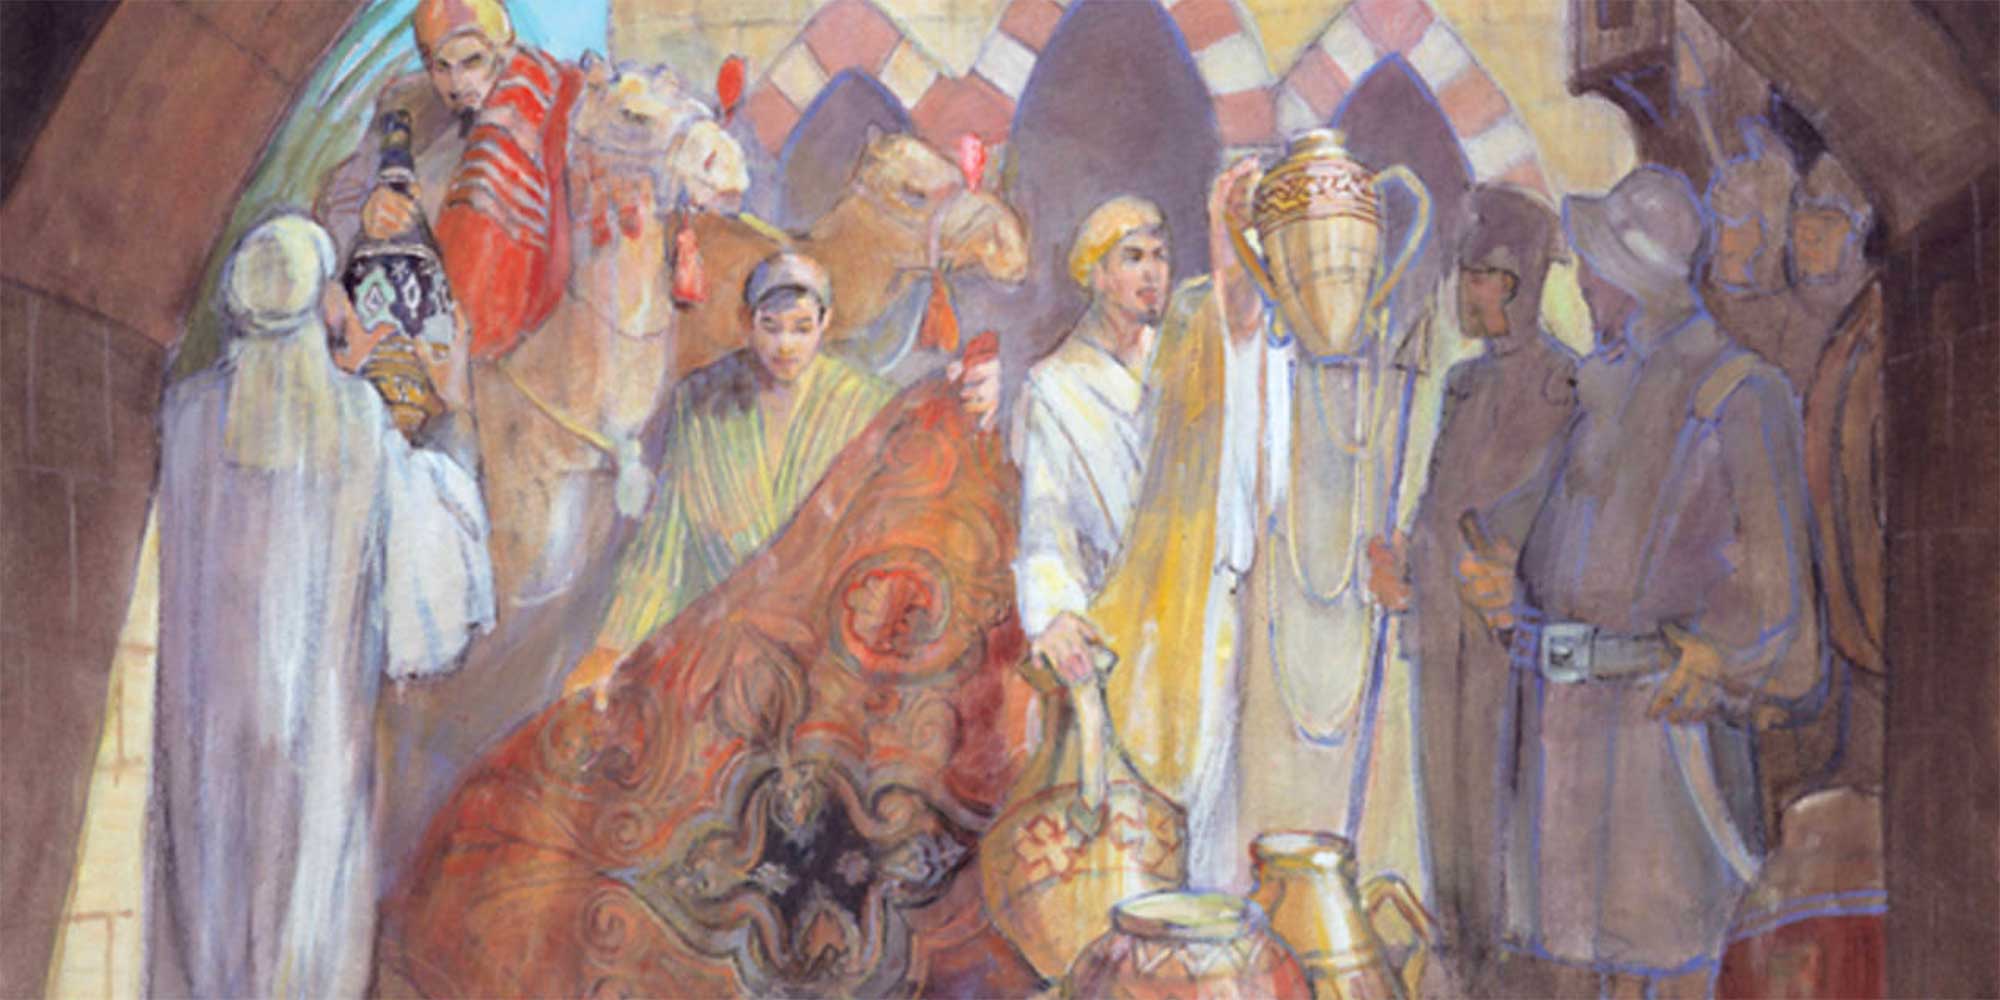 Nephi and his brothers giving their riches to obtain the Plates. Artwork by Minerva Teichert